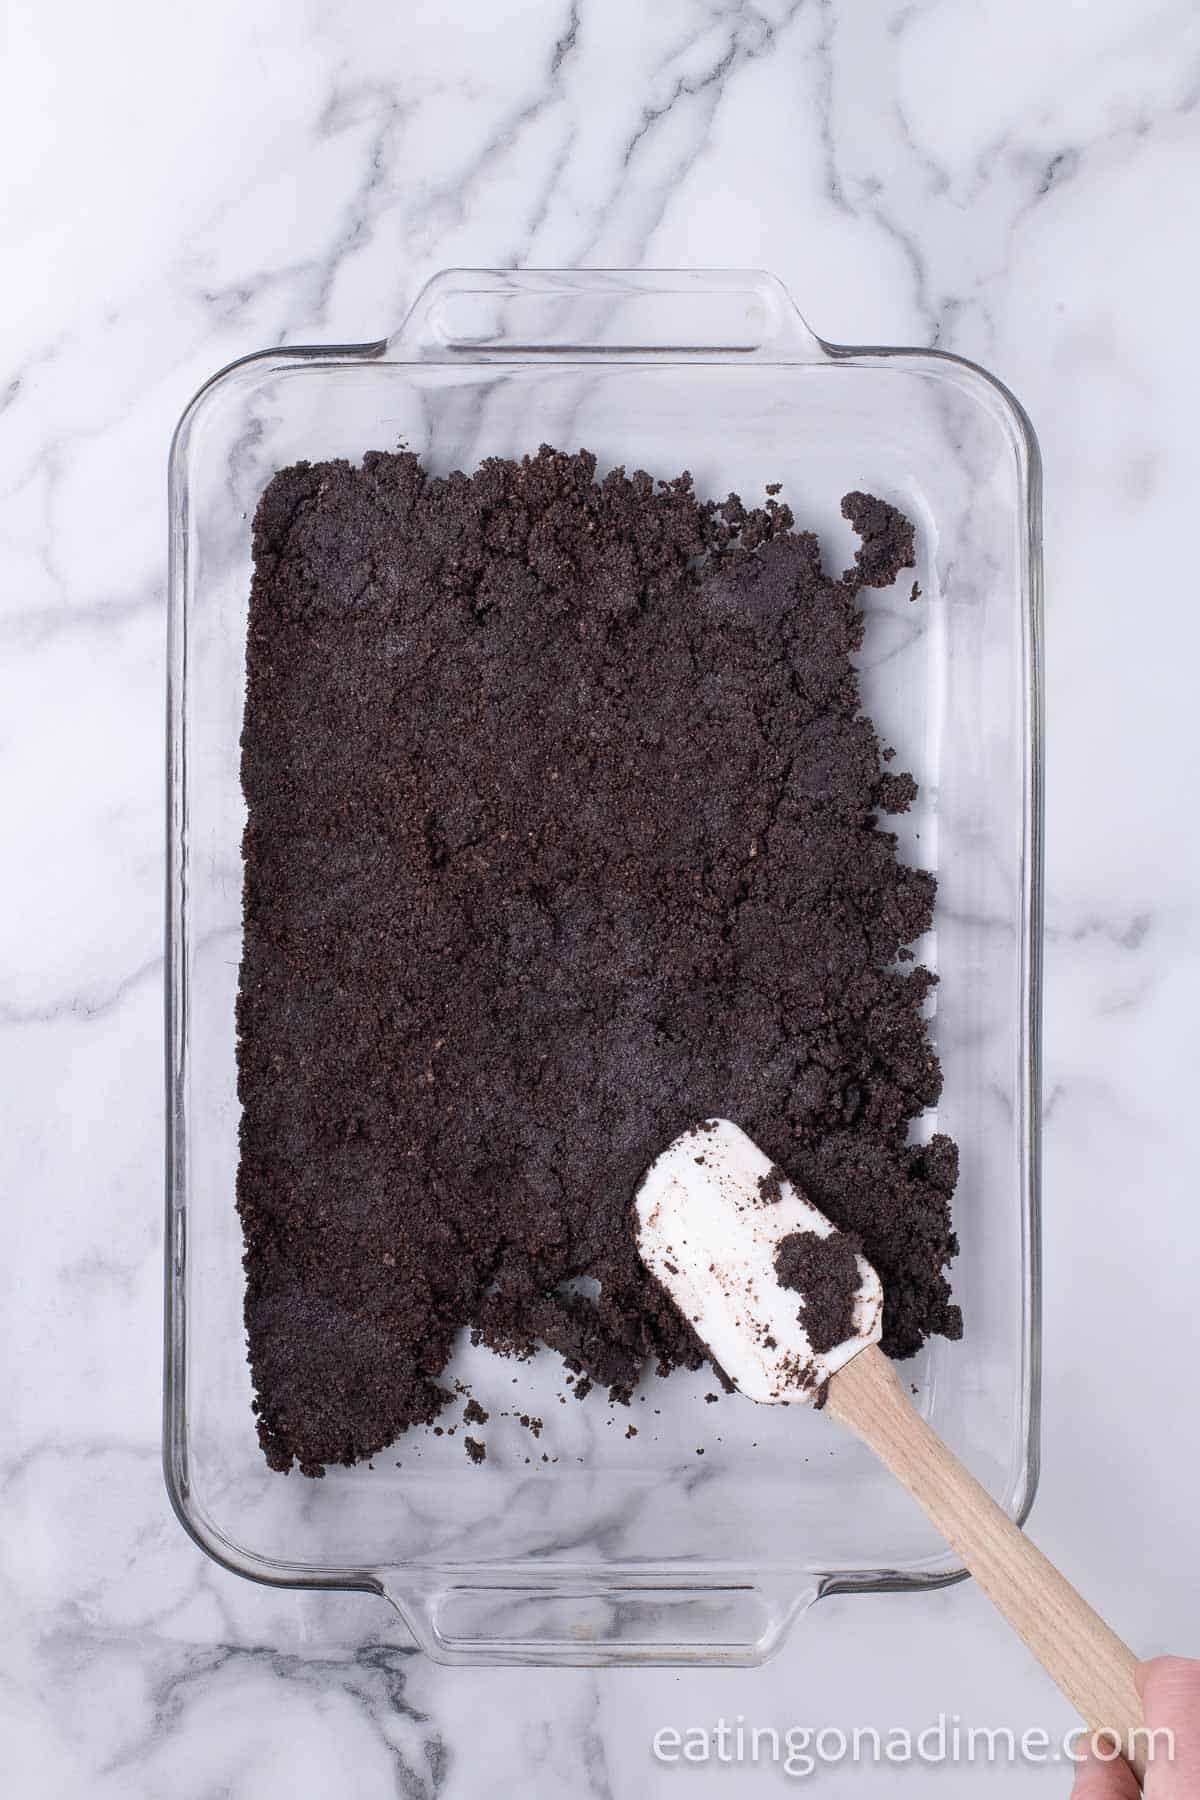 Pressing the Oreo Crust in the baking dish with a spatula